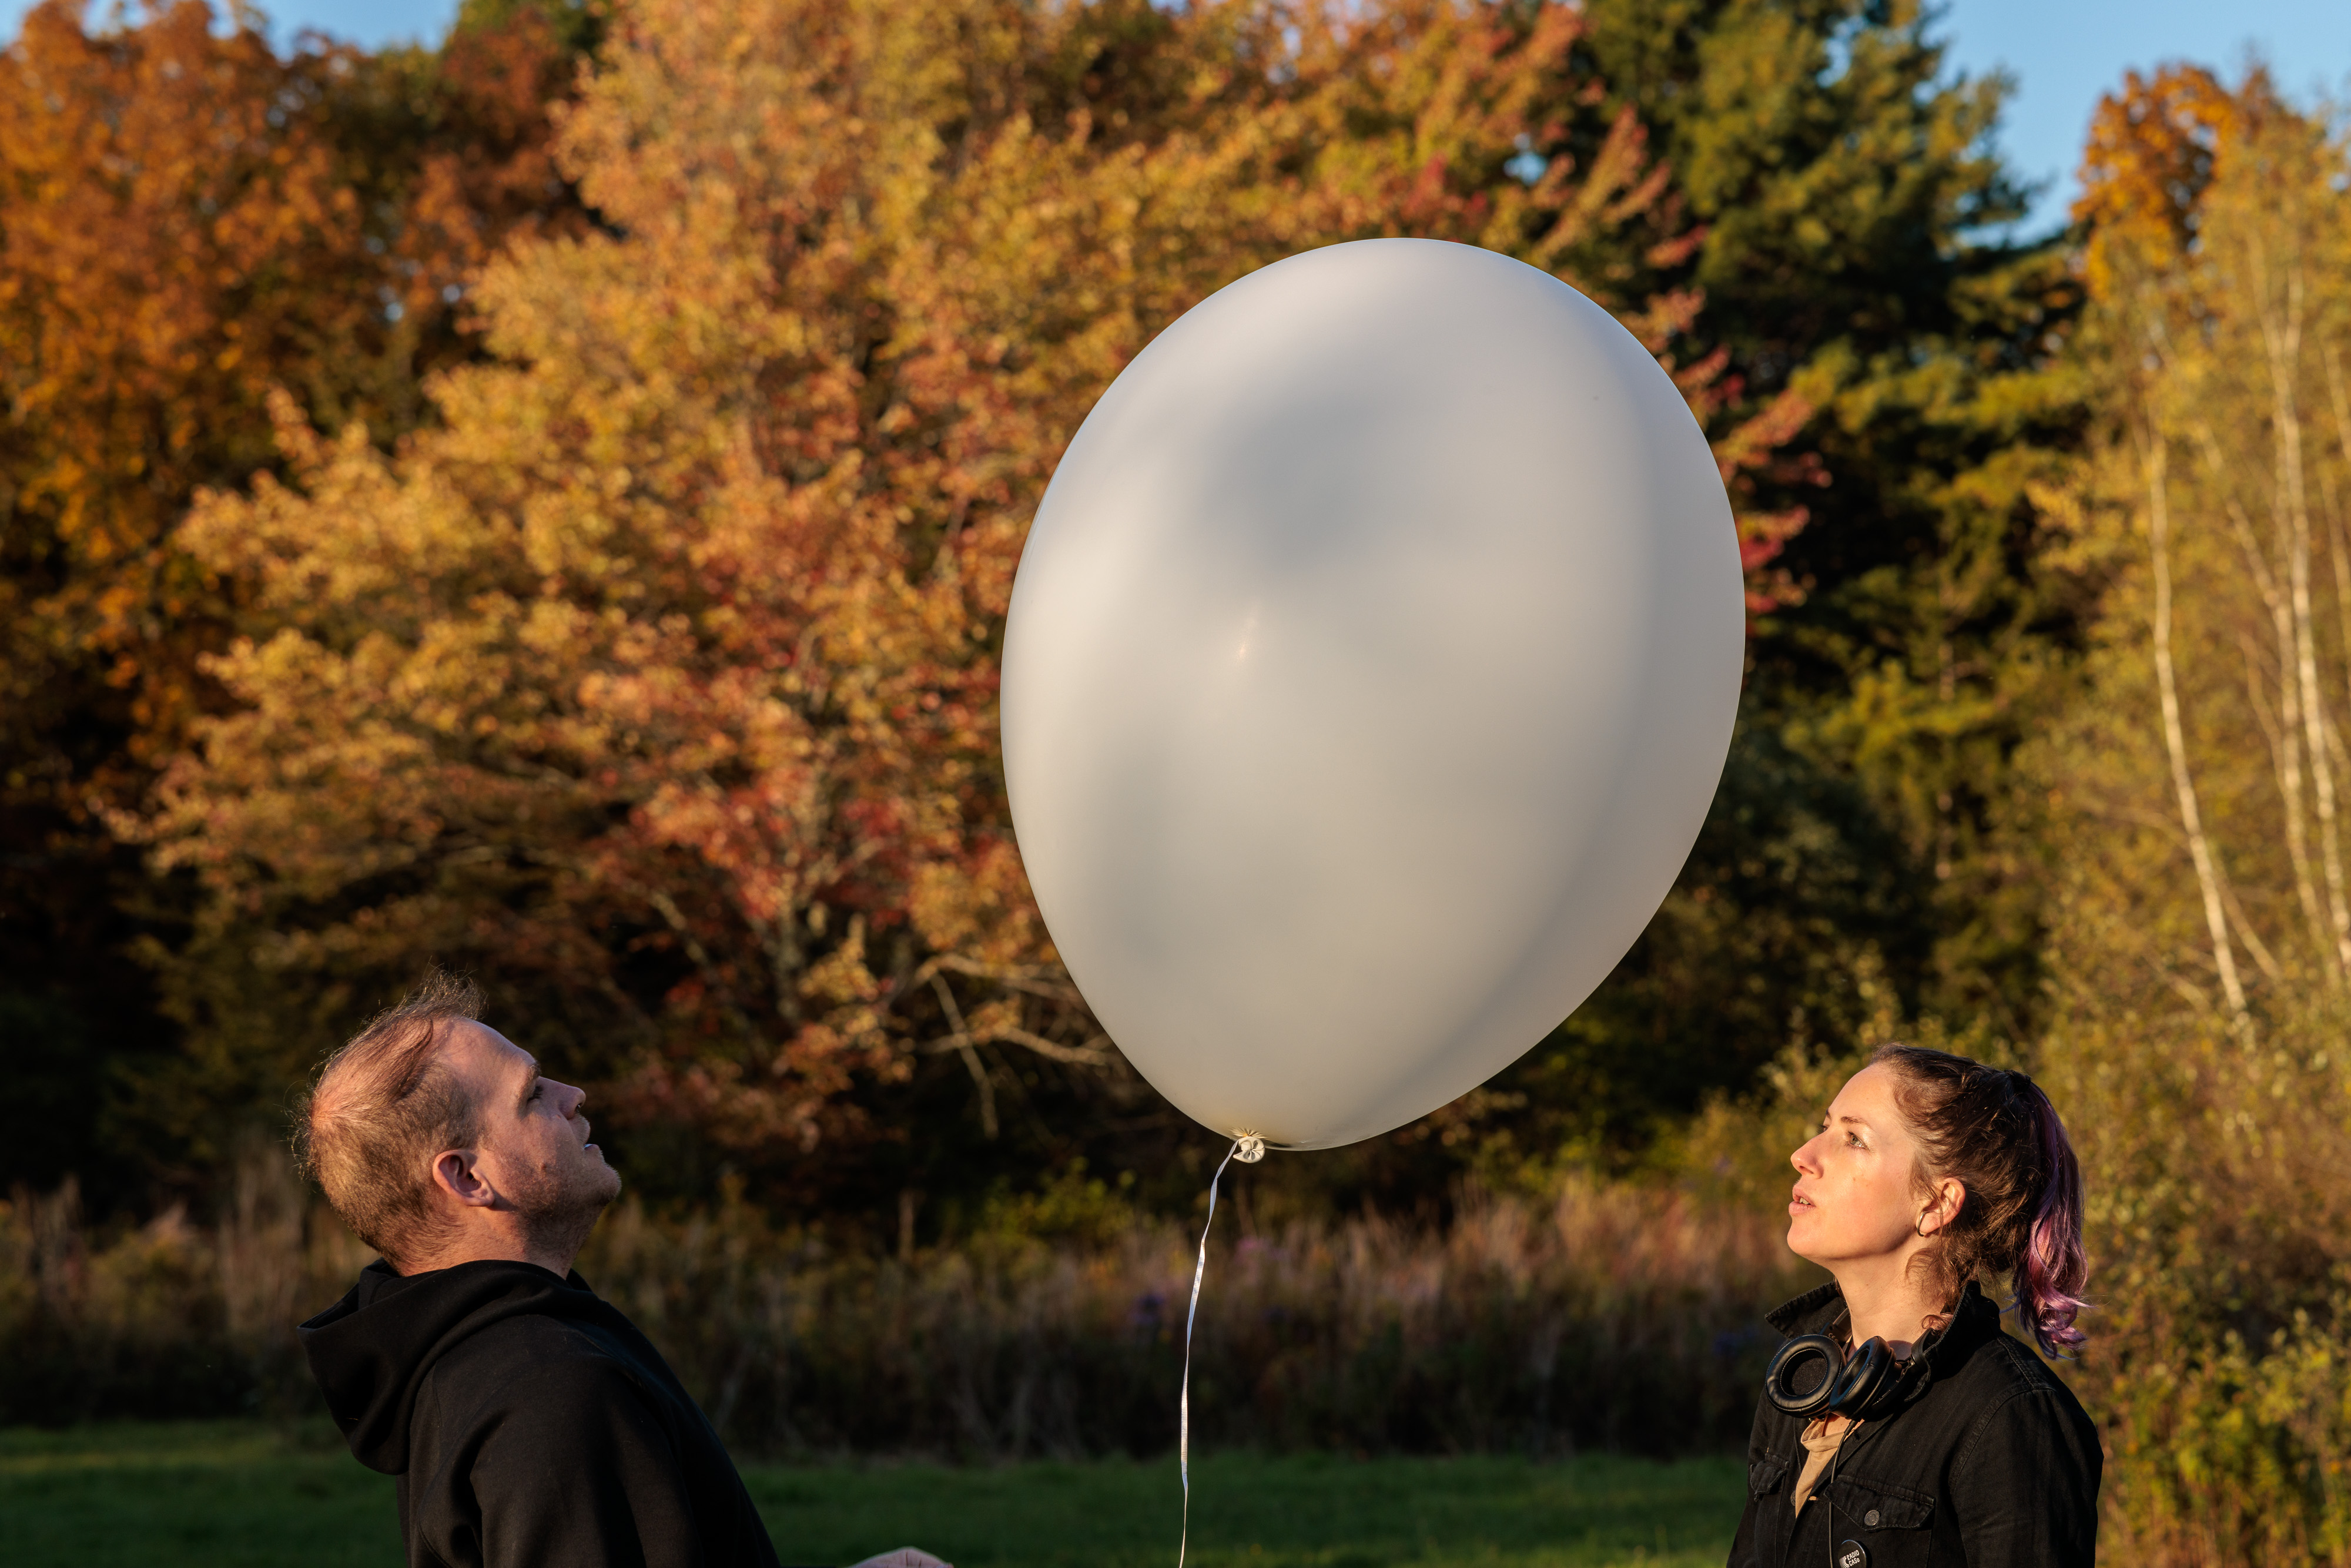 Florencia Curci and Agustín Genoud vocalize with an INSECTA balloon